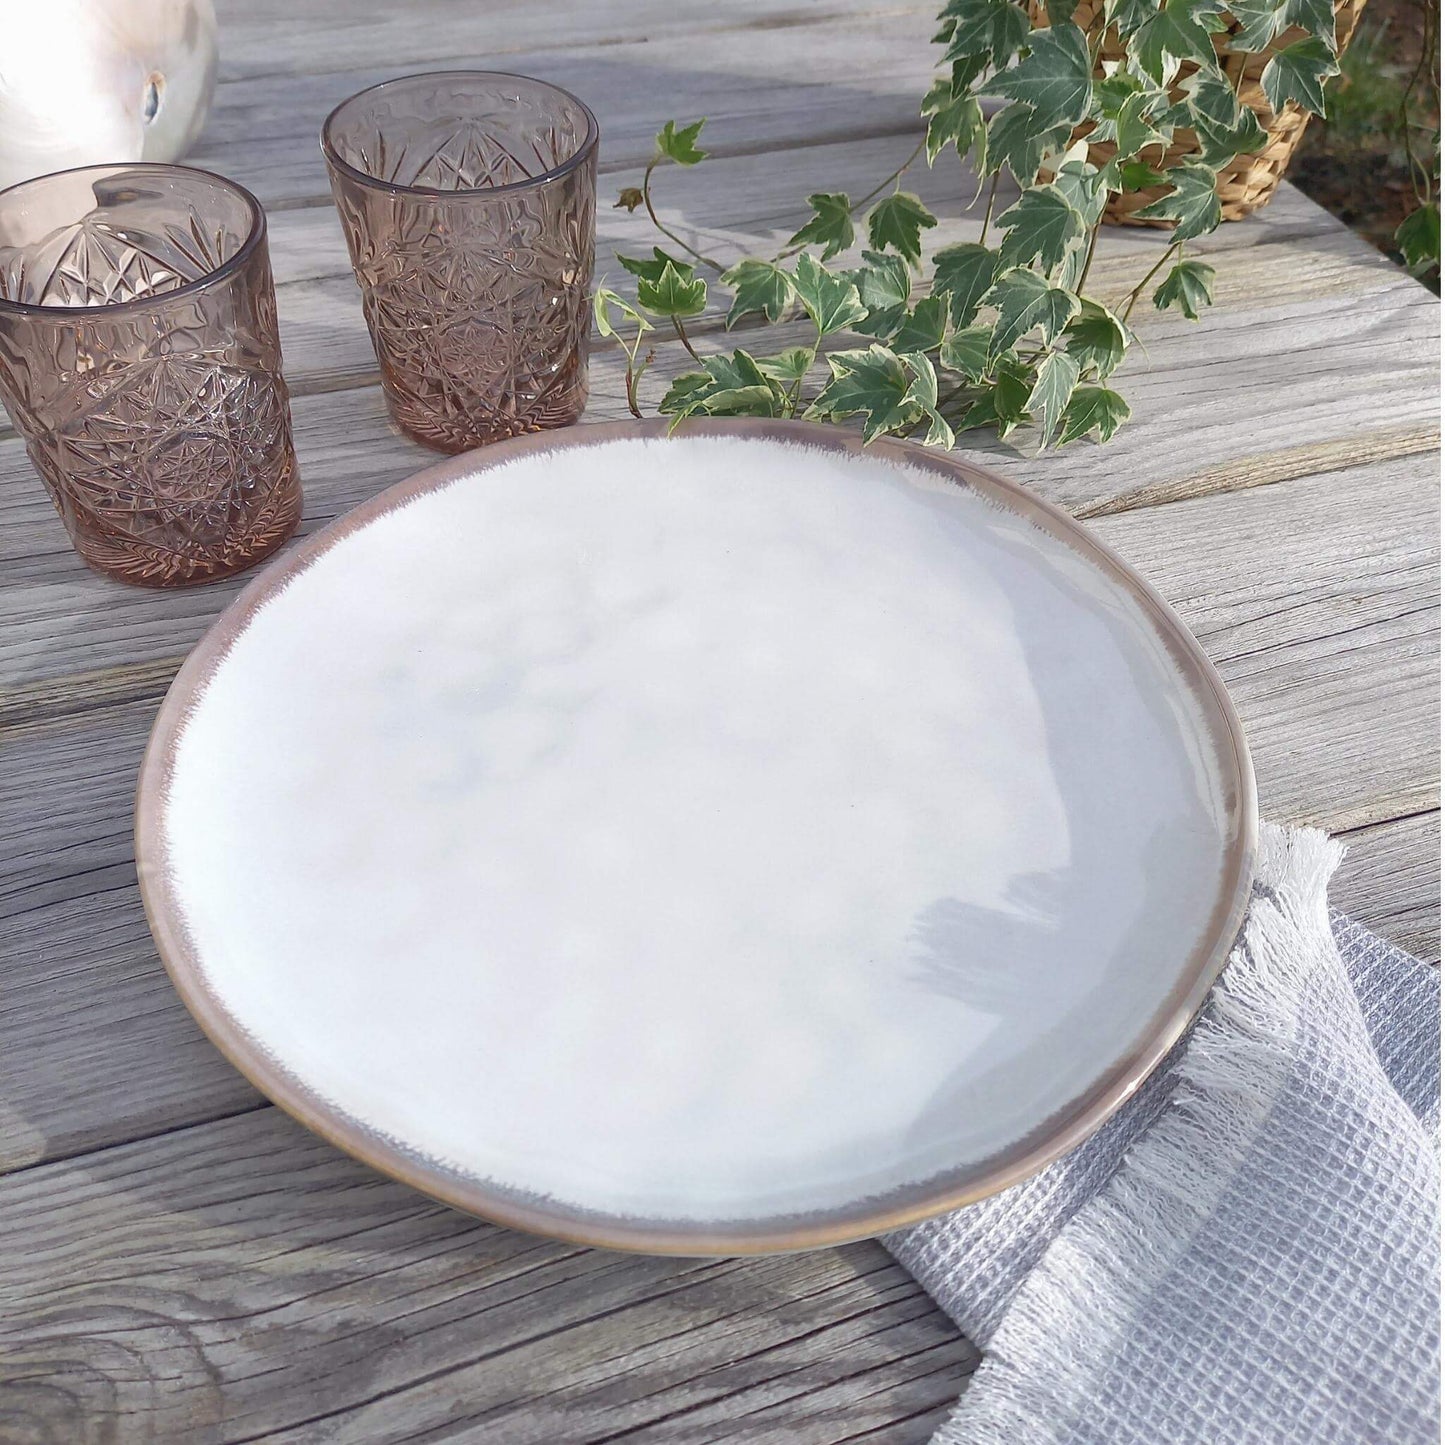 Biarritz - mother-of-pearl white dinner plate 28 cm - Unik by Nature